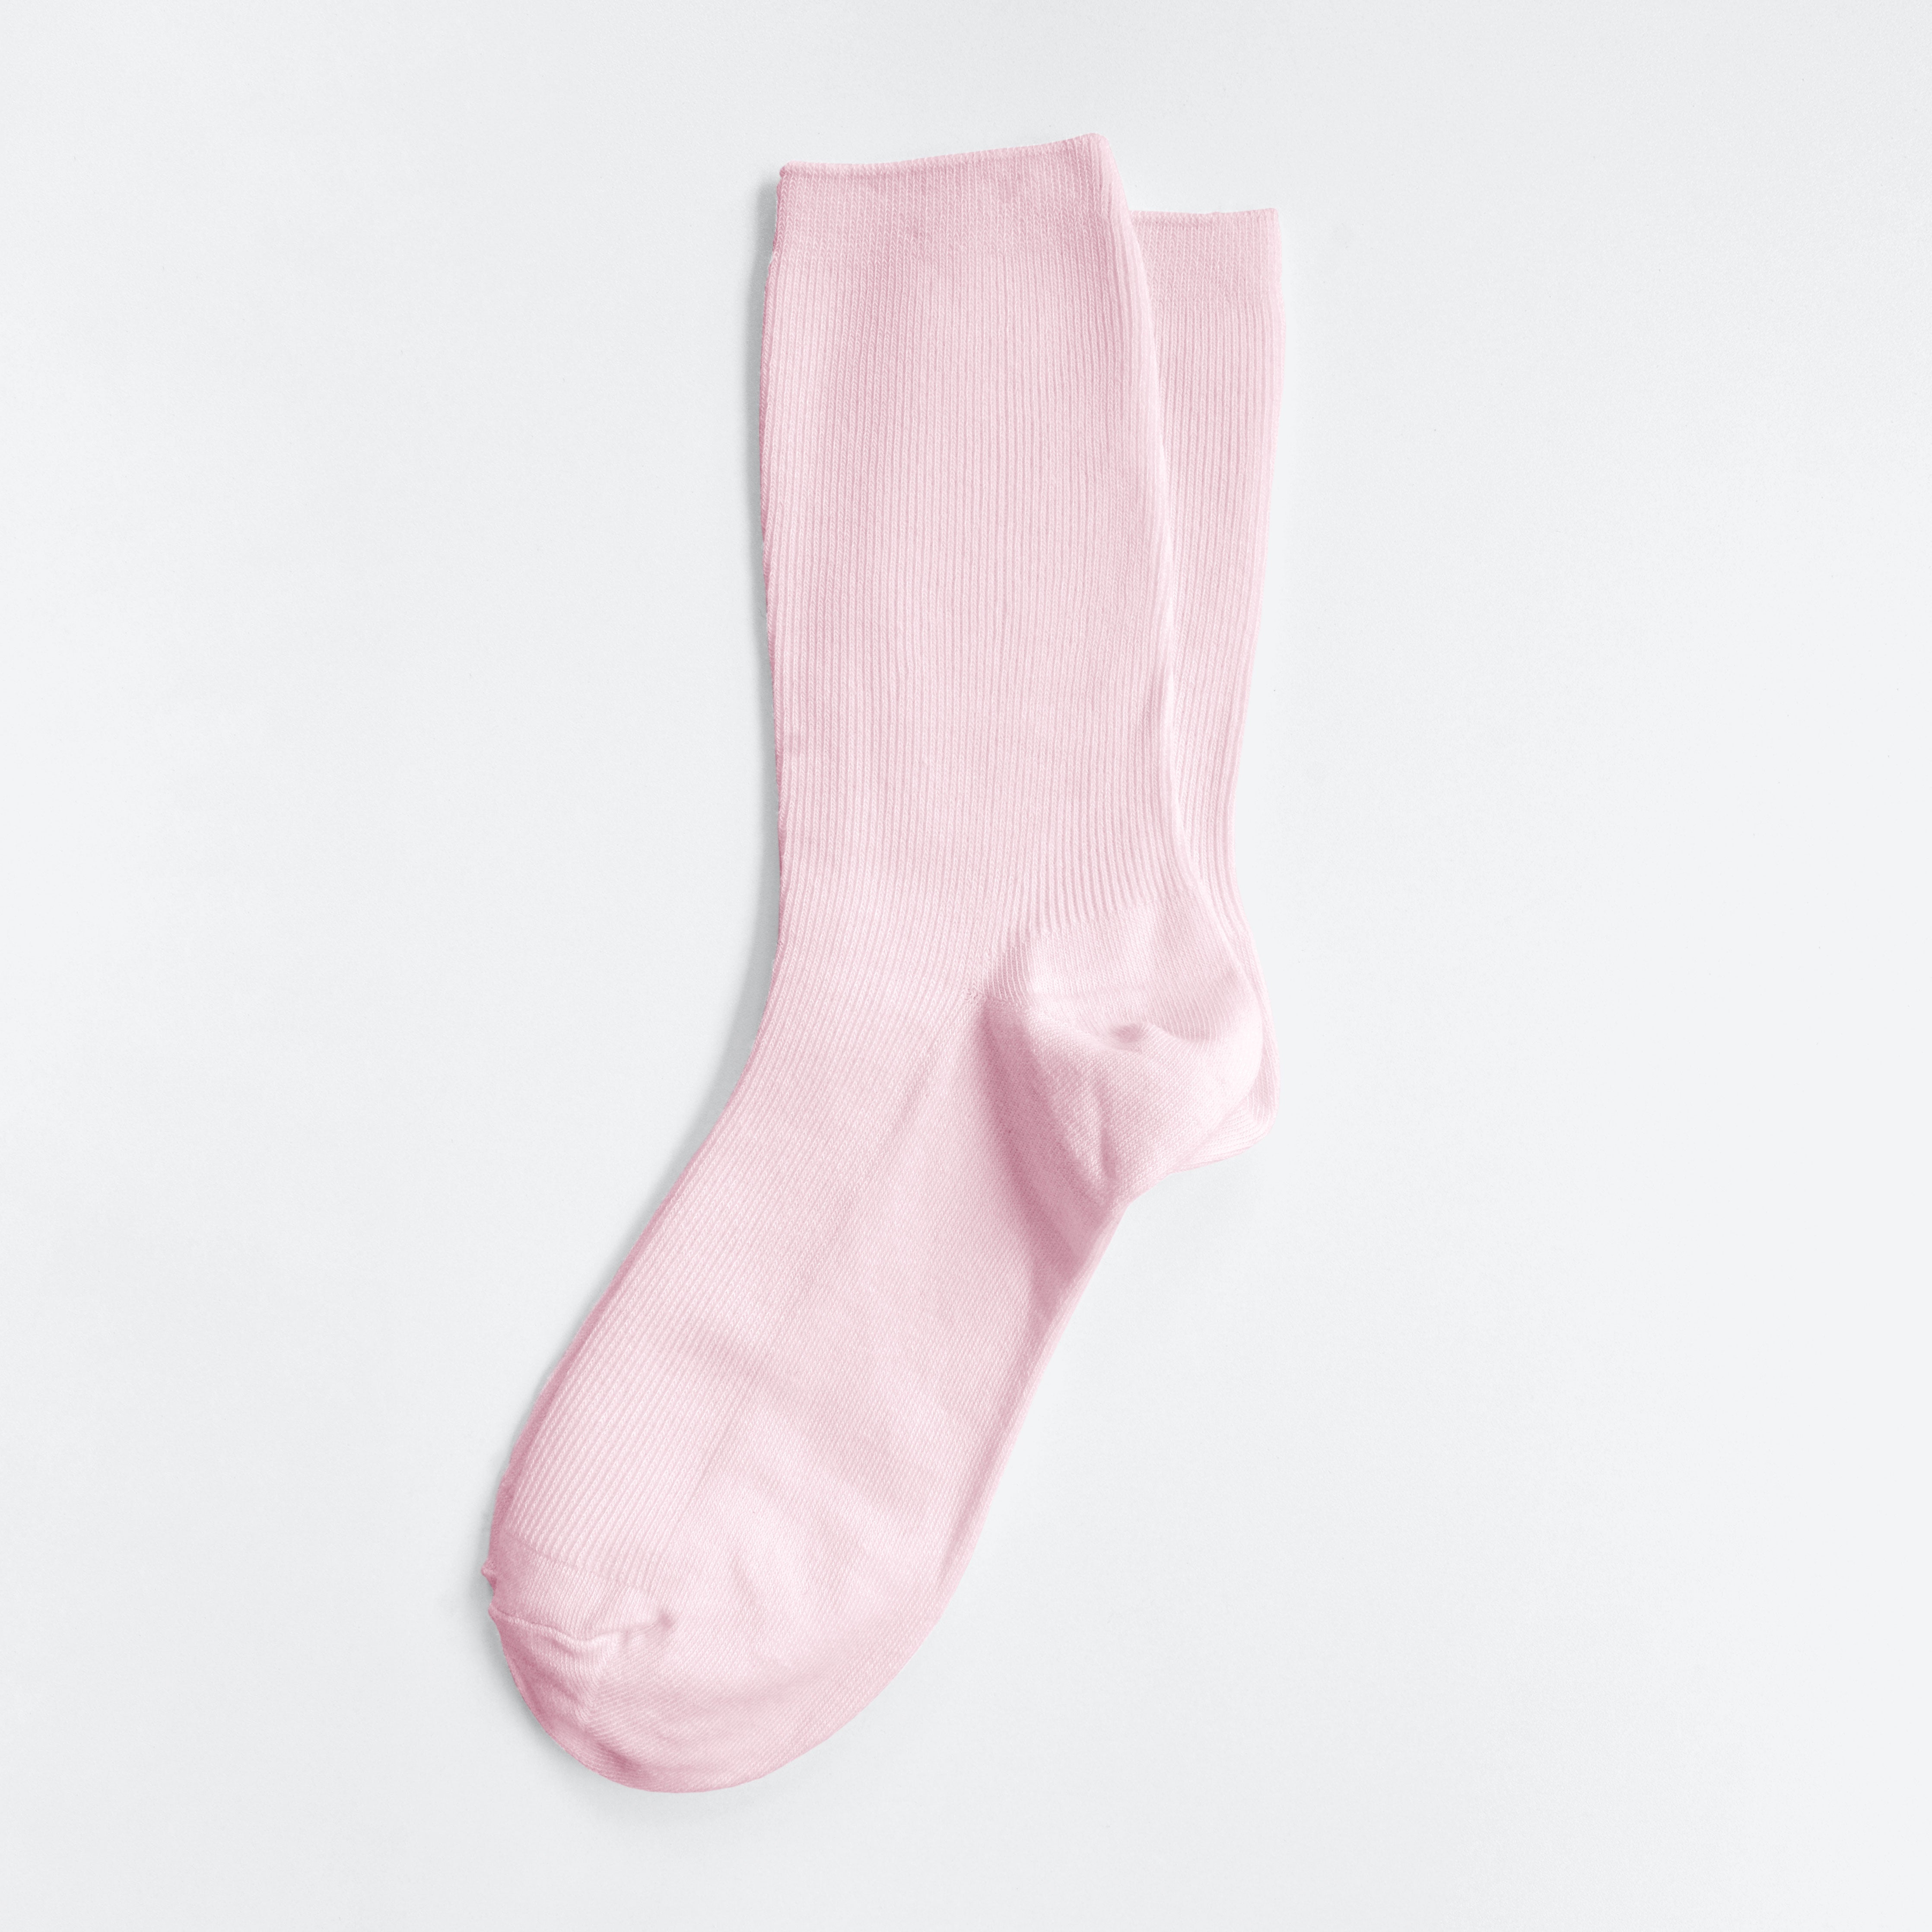 Hooray Sock Co.&#39;s Everyday Pink Cotton Socks: Comfy, colorful, and unisex. 80% cotton, 20% spandex. Machine washable. Made in South Korea. Fits US women&#39;s shoe sizes 4-10.